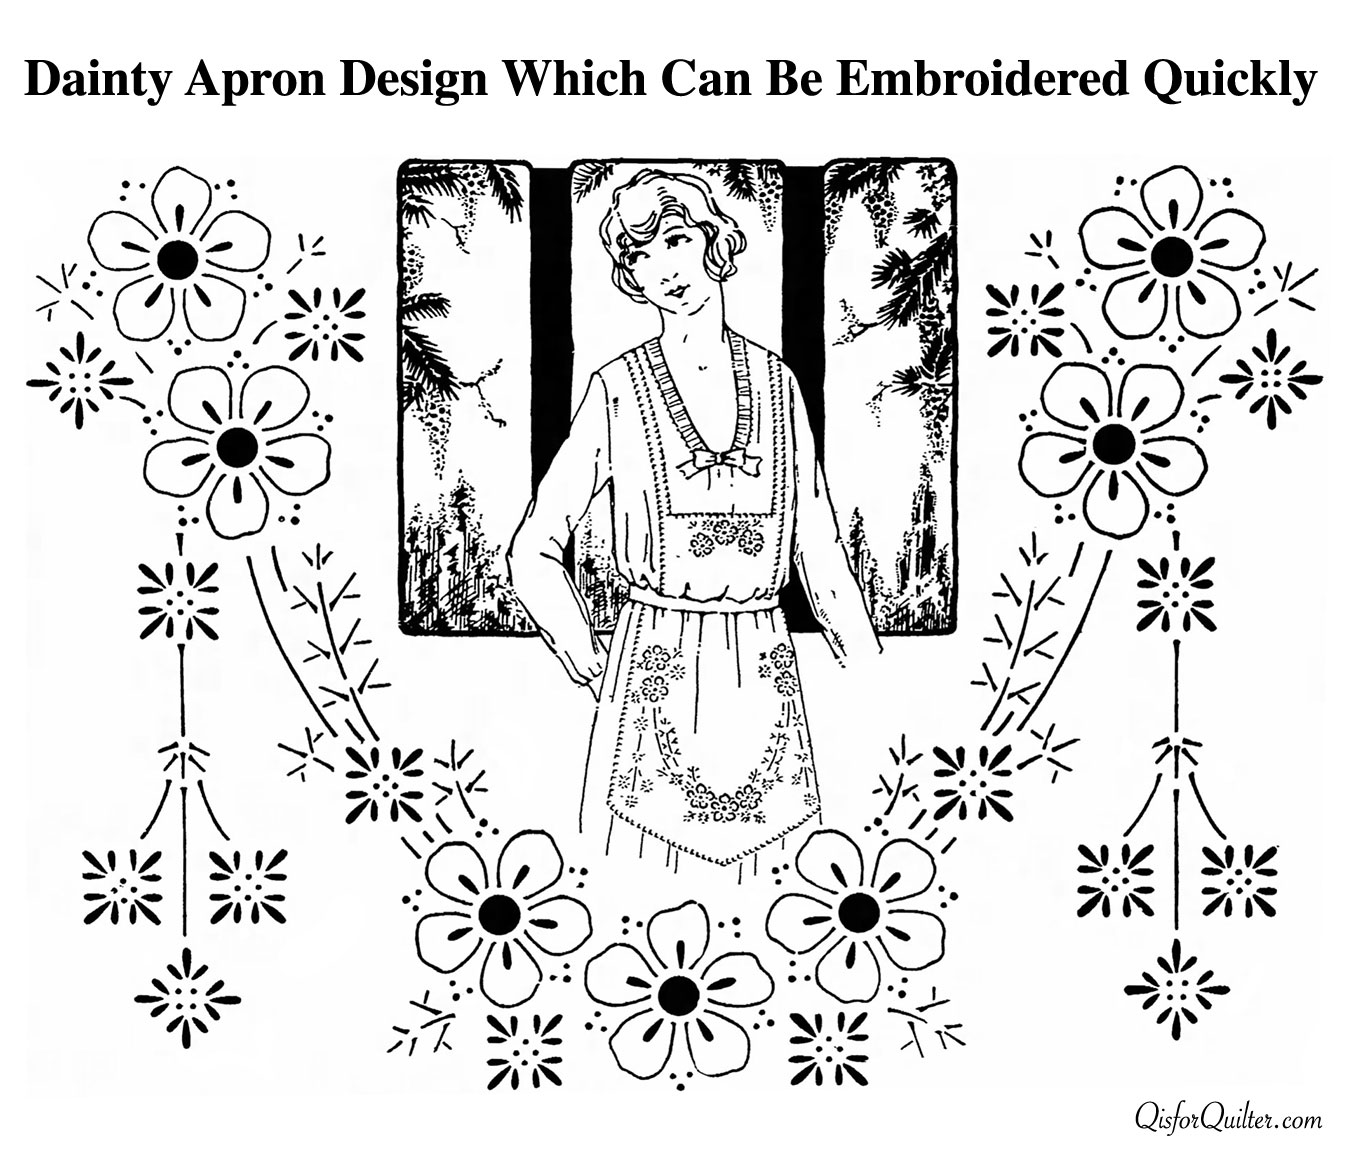 Housewifely Wisdom — Embroidery Patterns From 1920s Newspapers – Q is ...